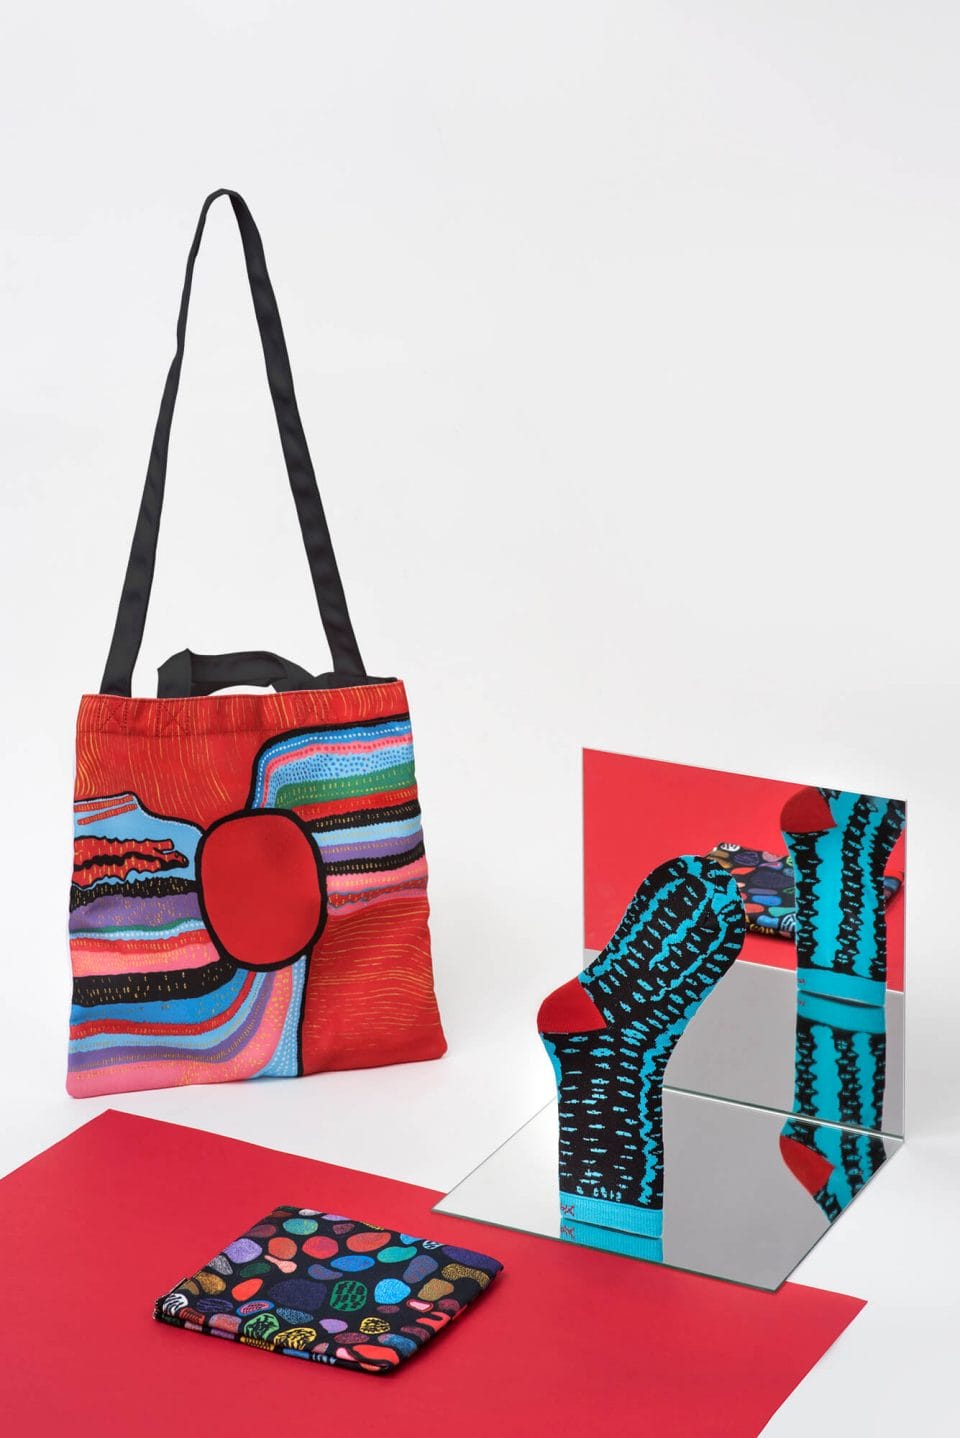 Gallery_Yayoi-Product_Images-3-Tote-Pouch-Socks-1